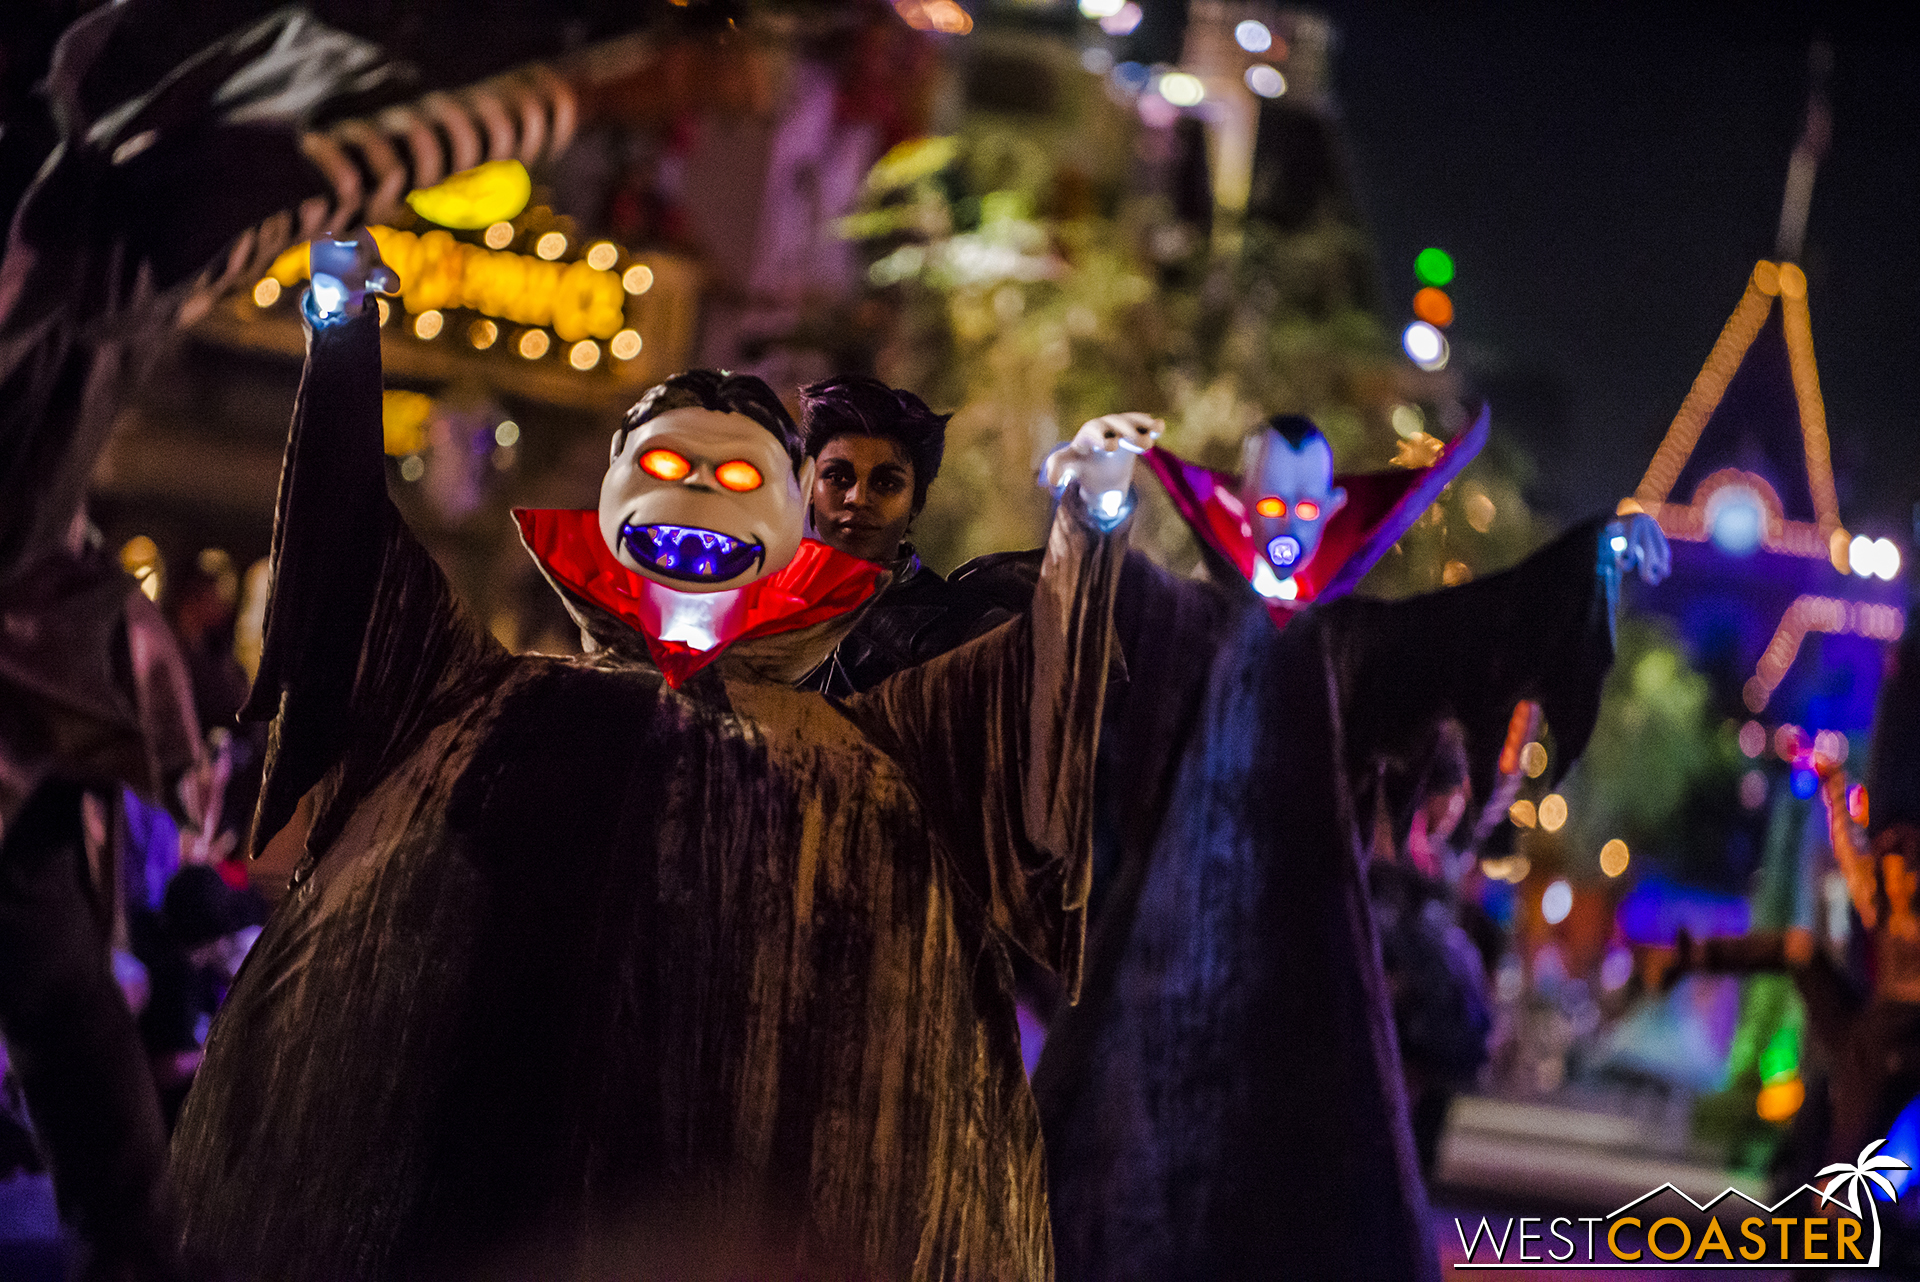  With a  Nightmare Before Christmas  flair, the start of the parade has vampires and goblins. 